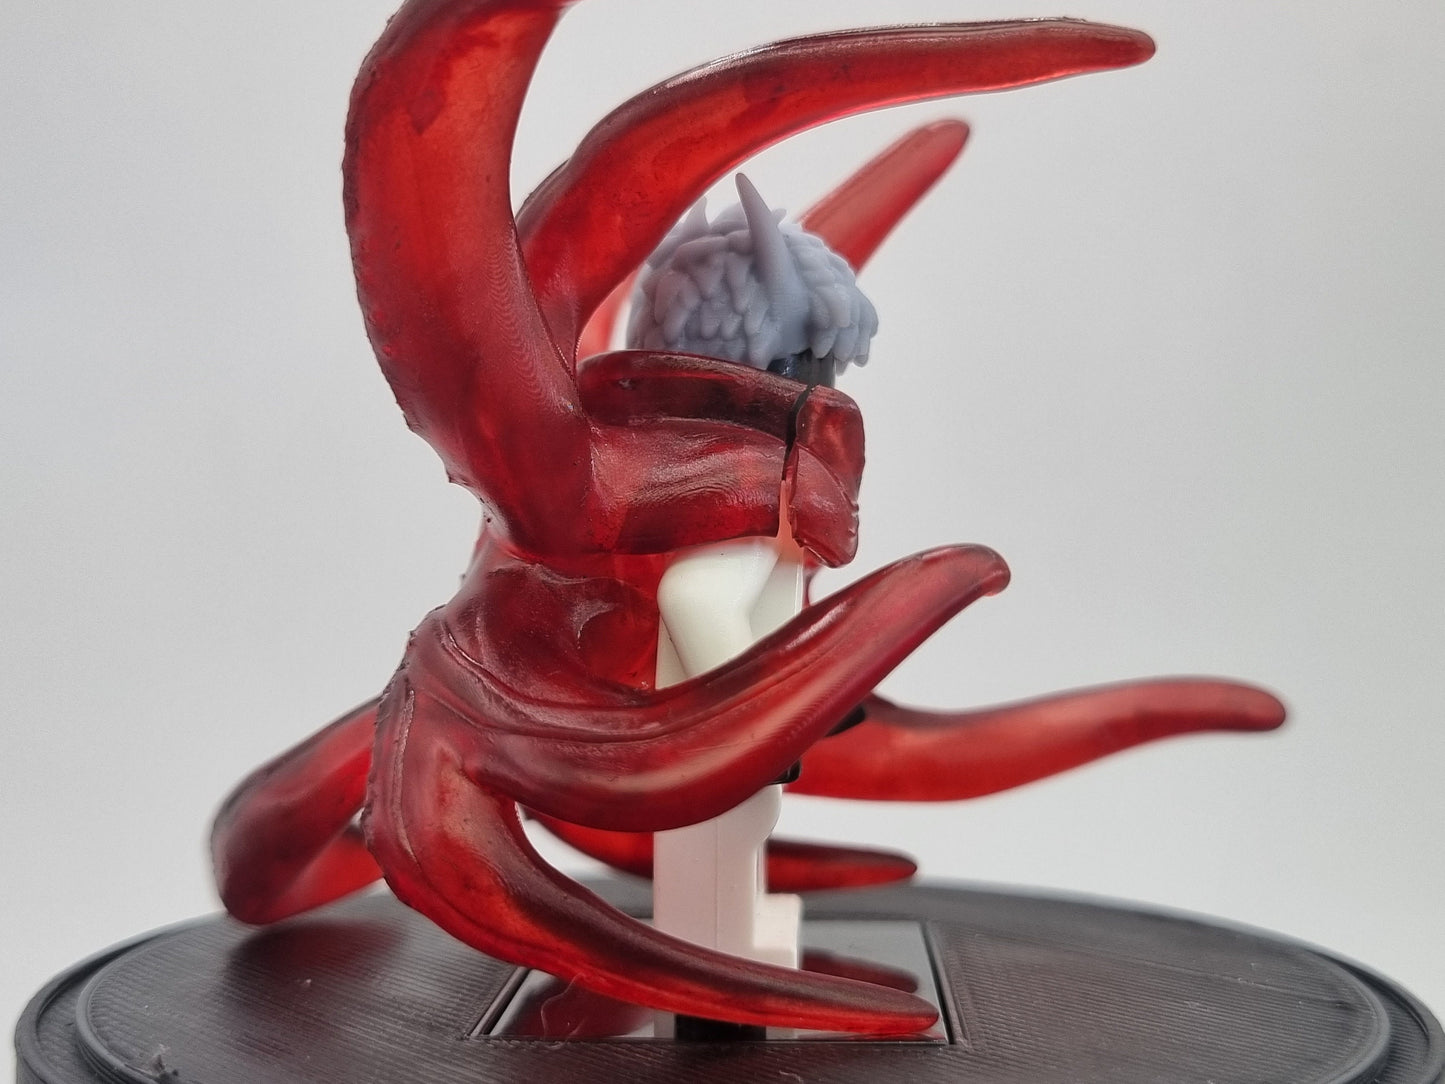 Building toy custom 3D printed and painted transparent tentical mode!